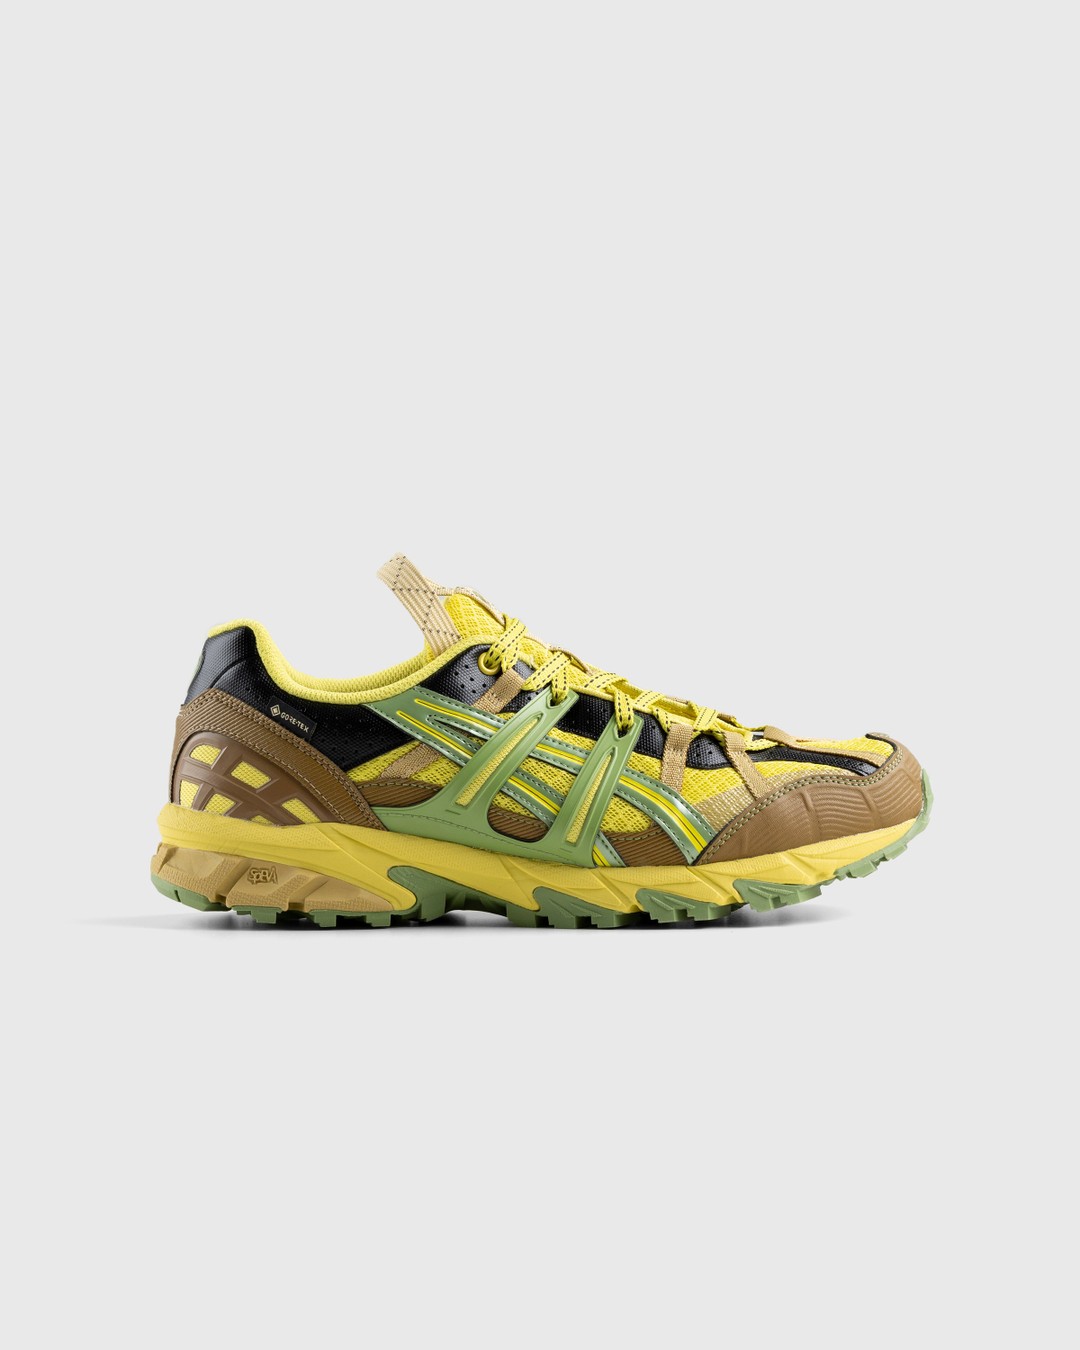 asics – HS4-S GEL-SONOMA 15-50 GTX Green Sheen/Espom - Low Top Sneakers - Yellow - Image 1